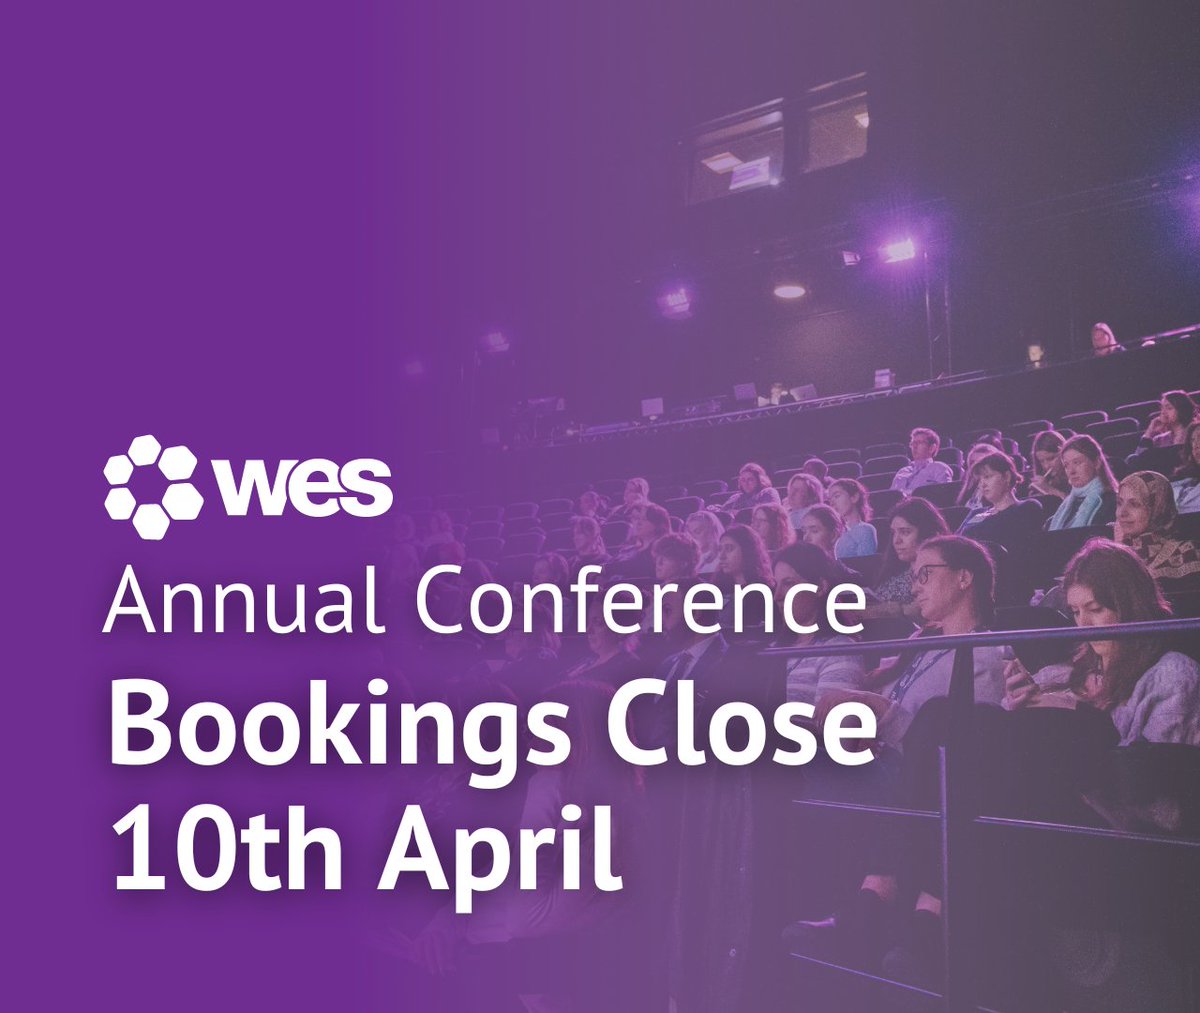 Secure your spot before it’s too late. Bookings for our Highly Anticipated #WESAnnualConference close on April 10th. Don’t miss out: ow.ly/nSre50R4sbn #BookNow #AnnualConference2024 #WES